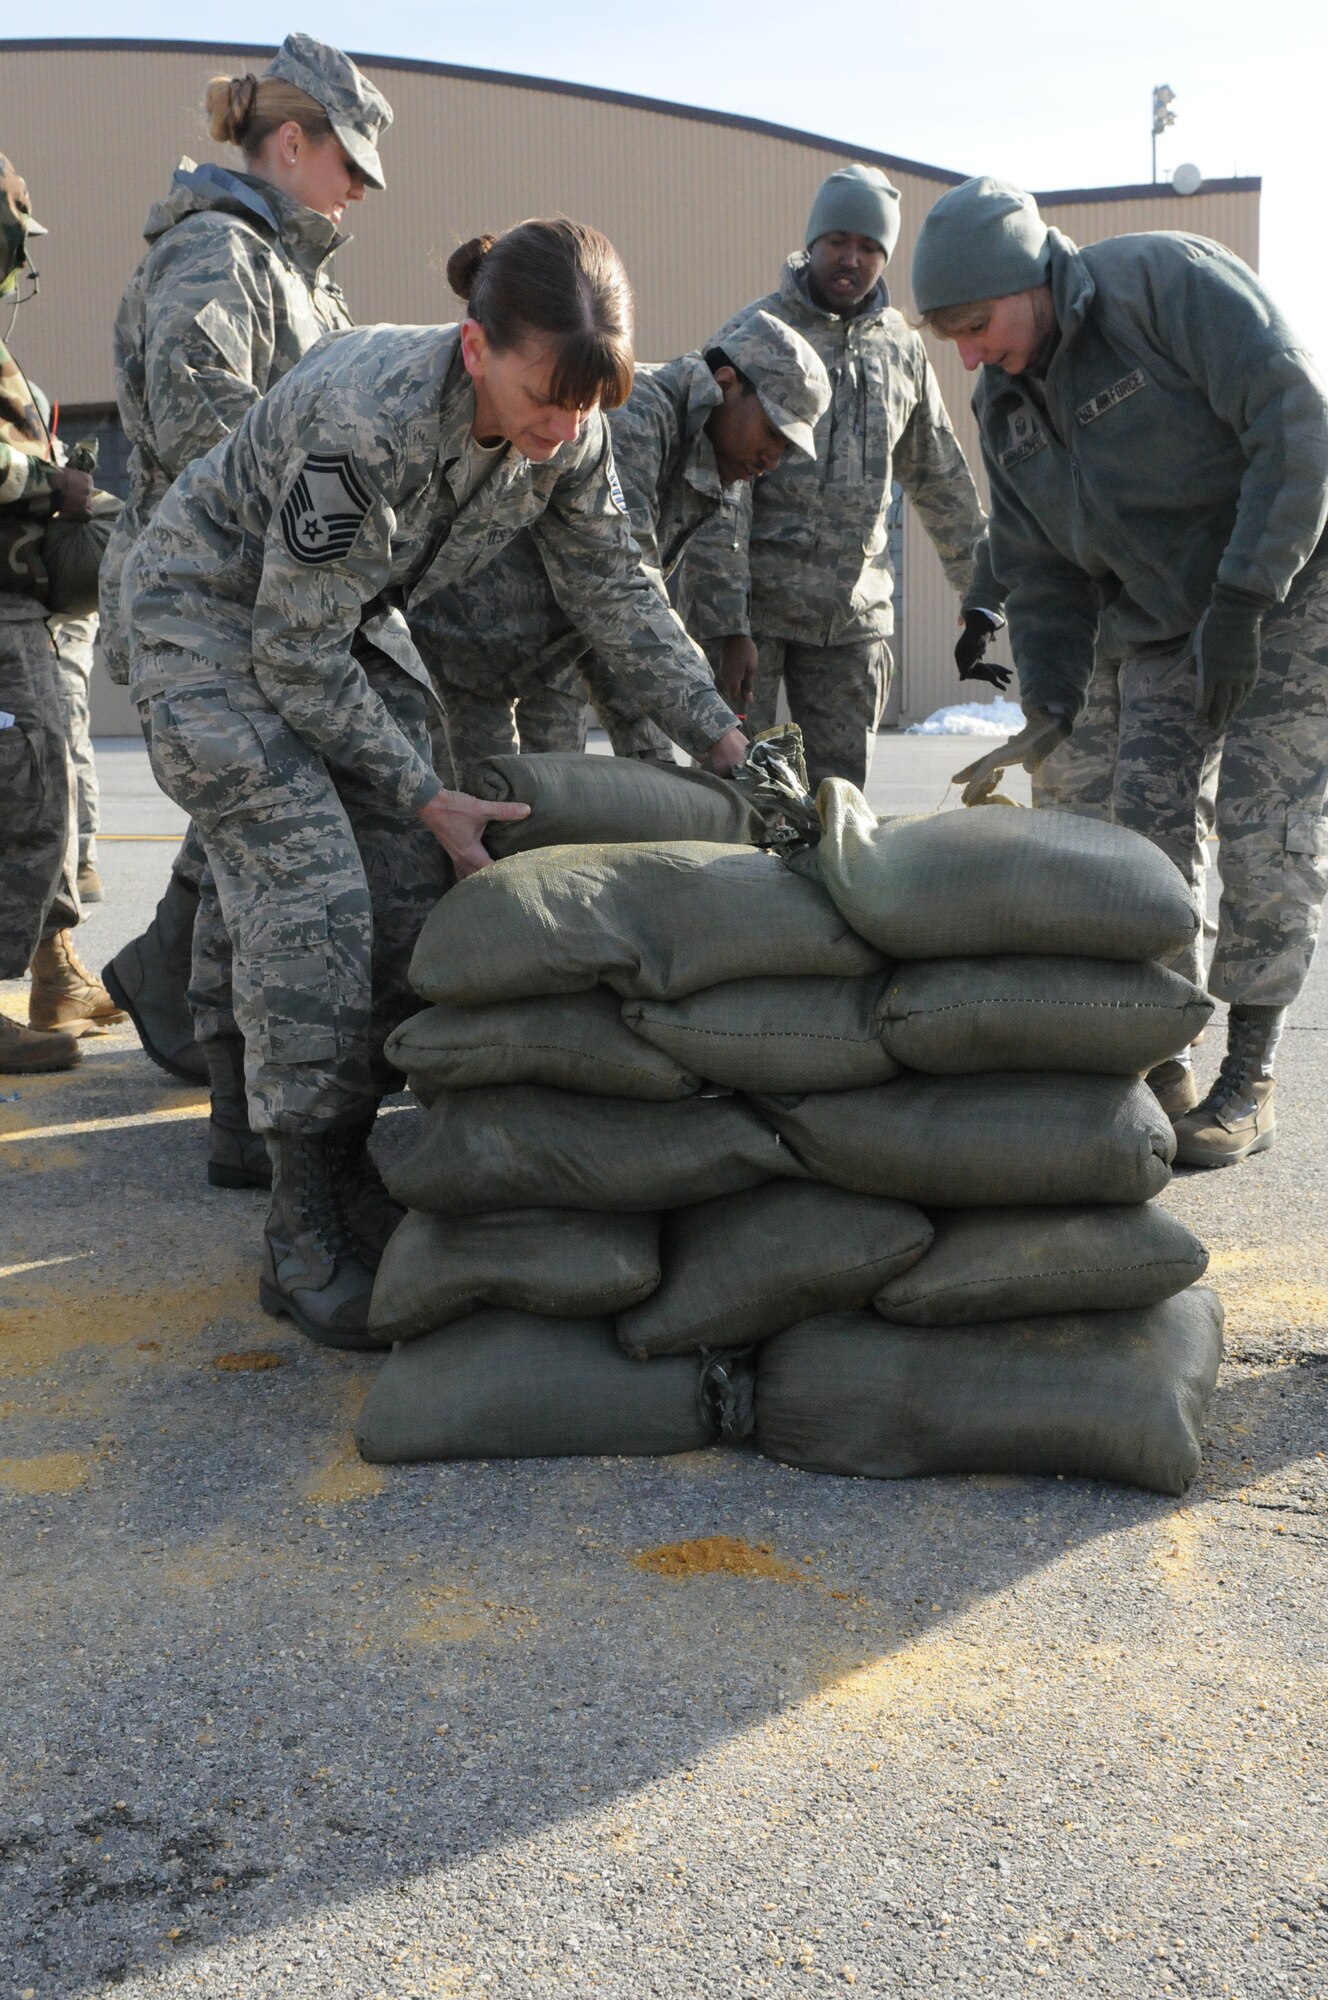 JOINT BASE ANDREWS, Md. -- Airmen from the 459th Air Refueling Wing practice building sandbag bunkers here Feb. 3 during a Ability to Survive and Operate training course. The Reserve servicemembers attended 14 different training courses over a two-day period that was focused on preparing them for future exercises and an upcoming Operational Readiness Inspection. Along with the ATSO course, the training also included items like how to identify unexploded ordinance, gas mask inpections and M-16 operations. (U.S. Air Force photo/Tech. Sgt. Steve Lewis) 